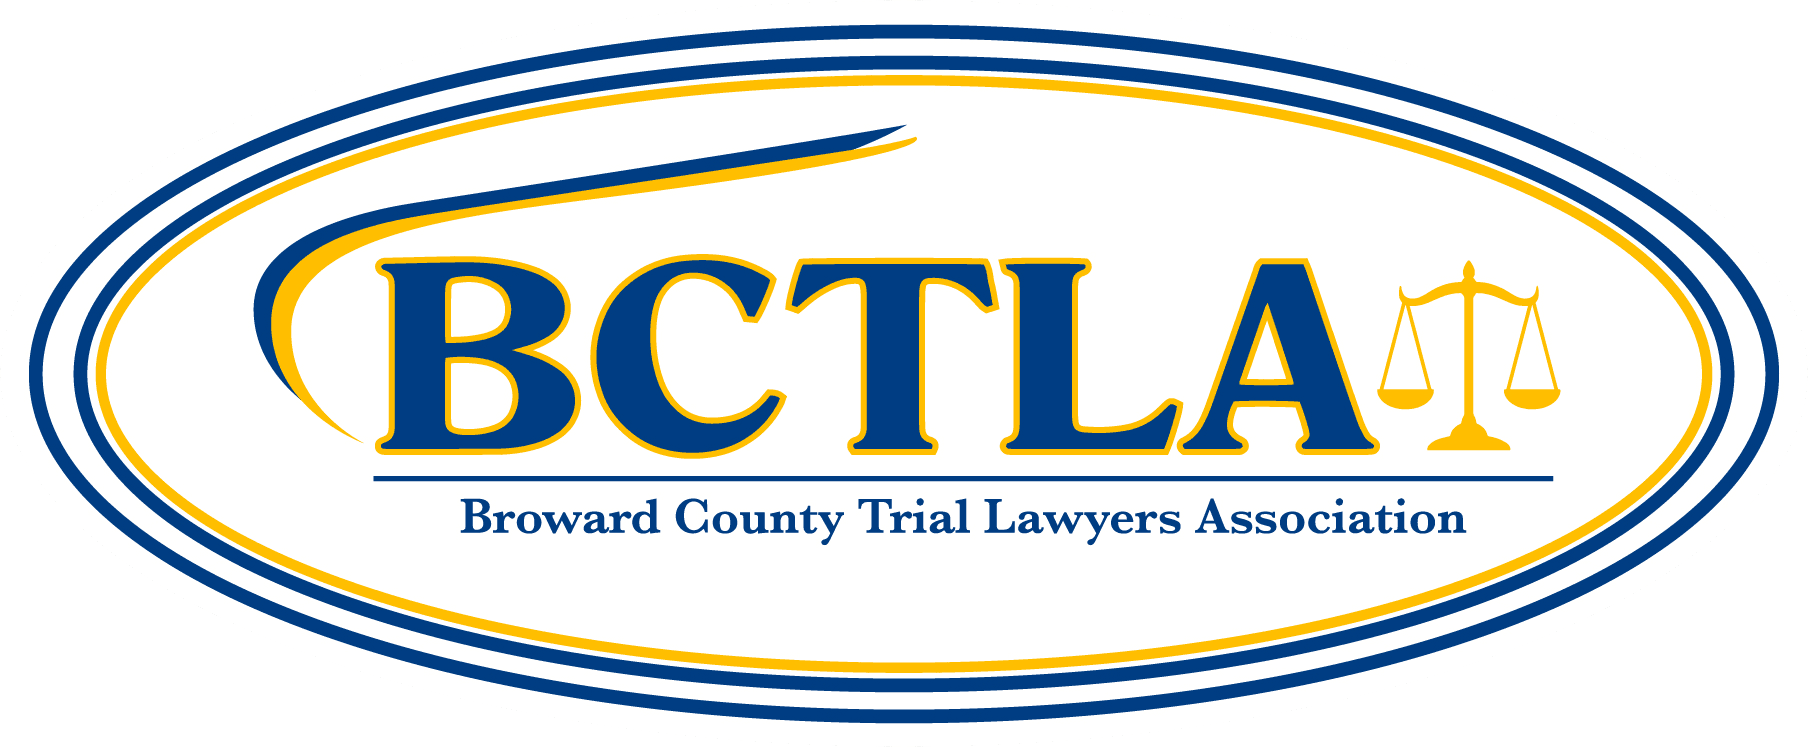 Image of Broward County Trial Lawyers Association